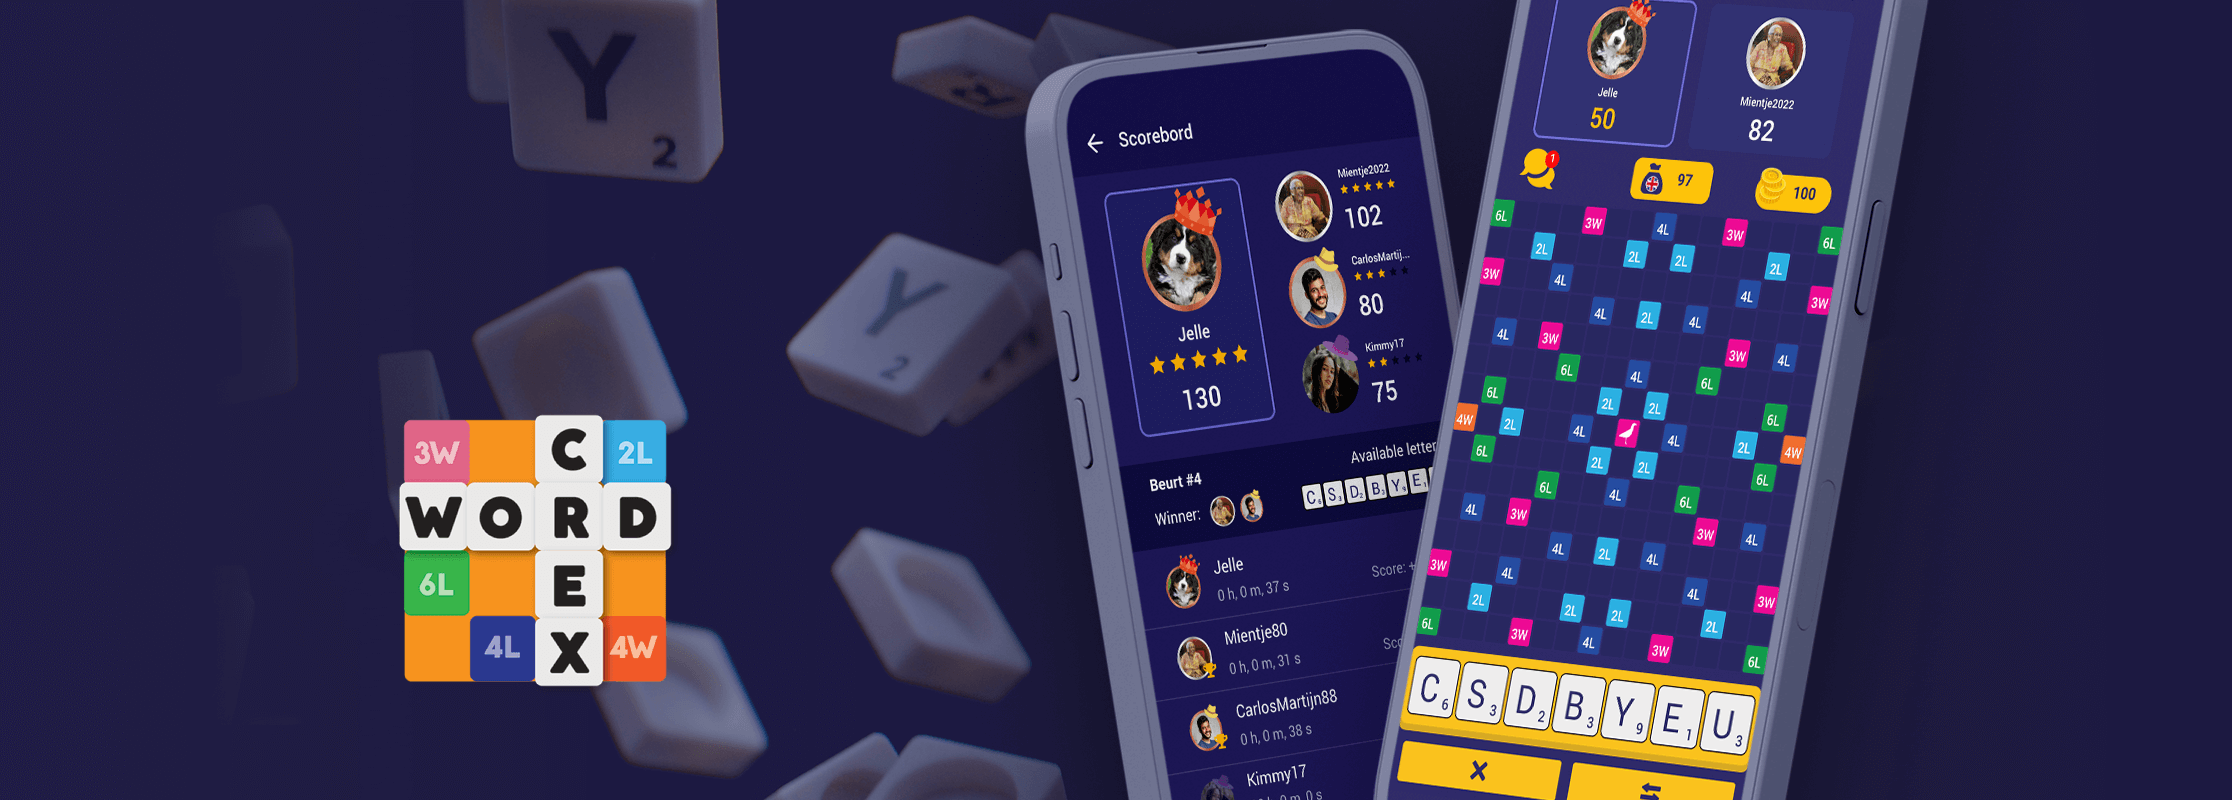 WordCrex: play the ultimate word game with >300,000 downloads